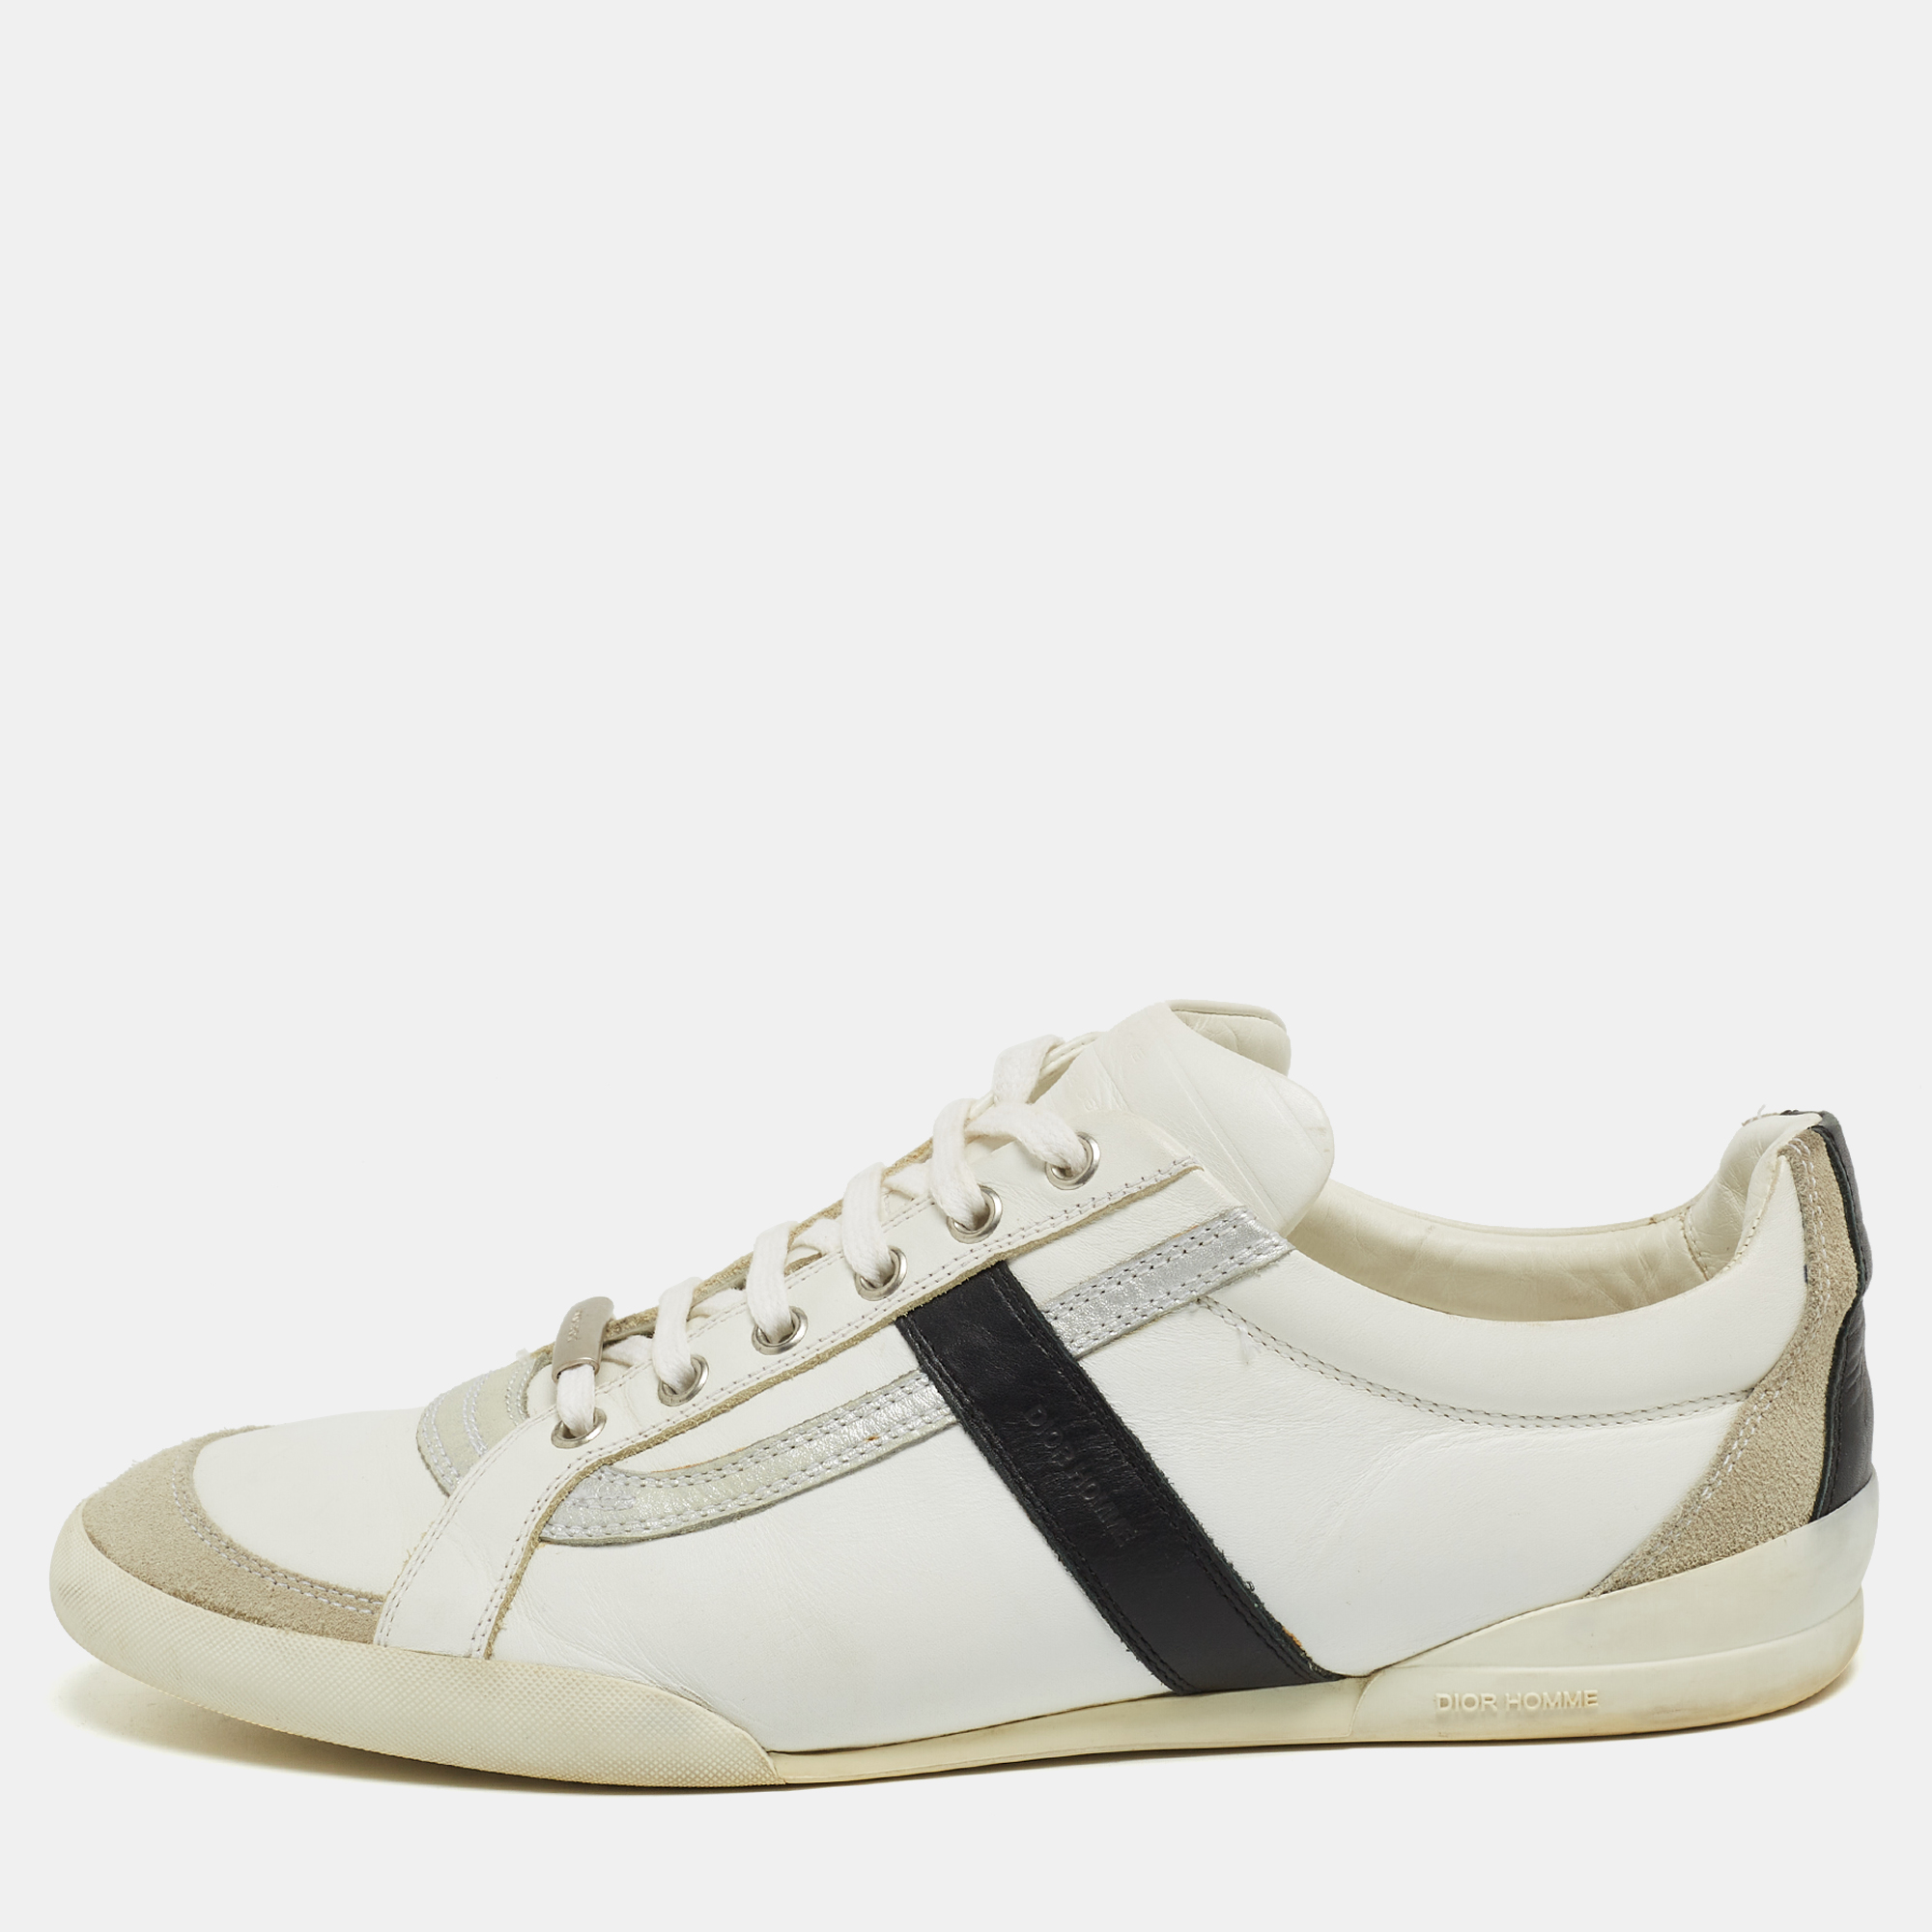 

Dior Homme Tricolor Leather and Suede Low Top Sneakers Size, White